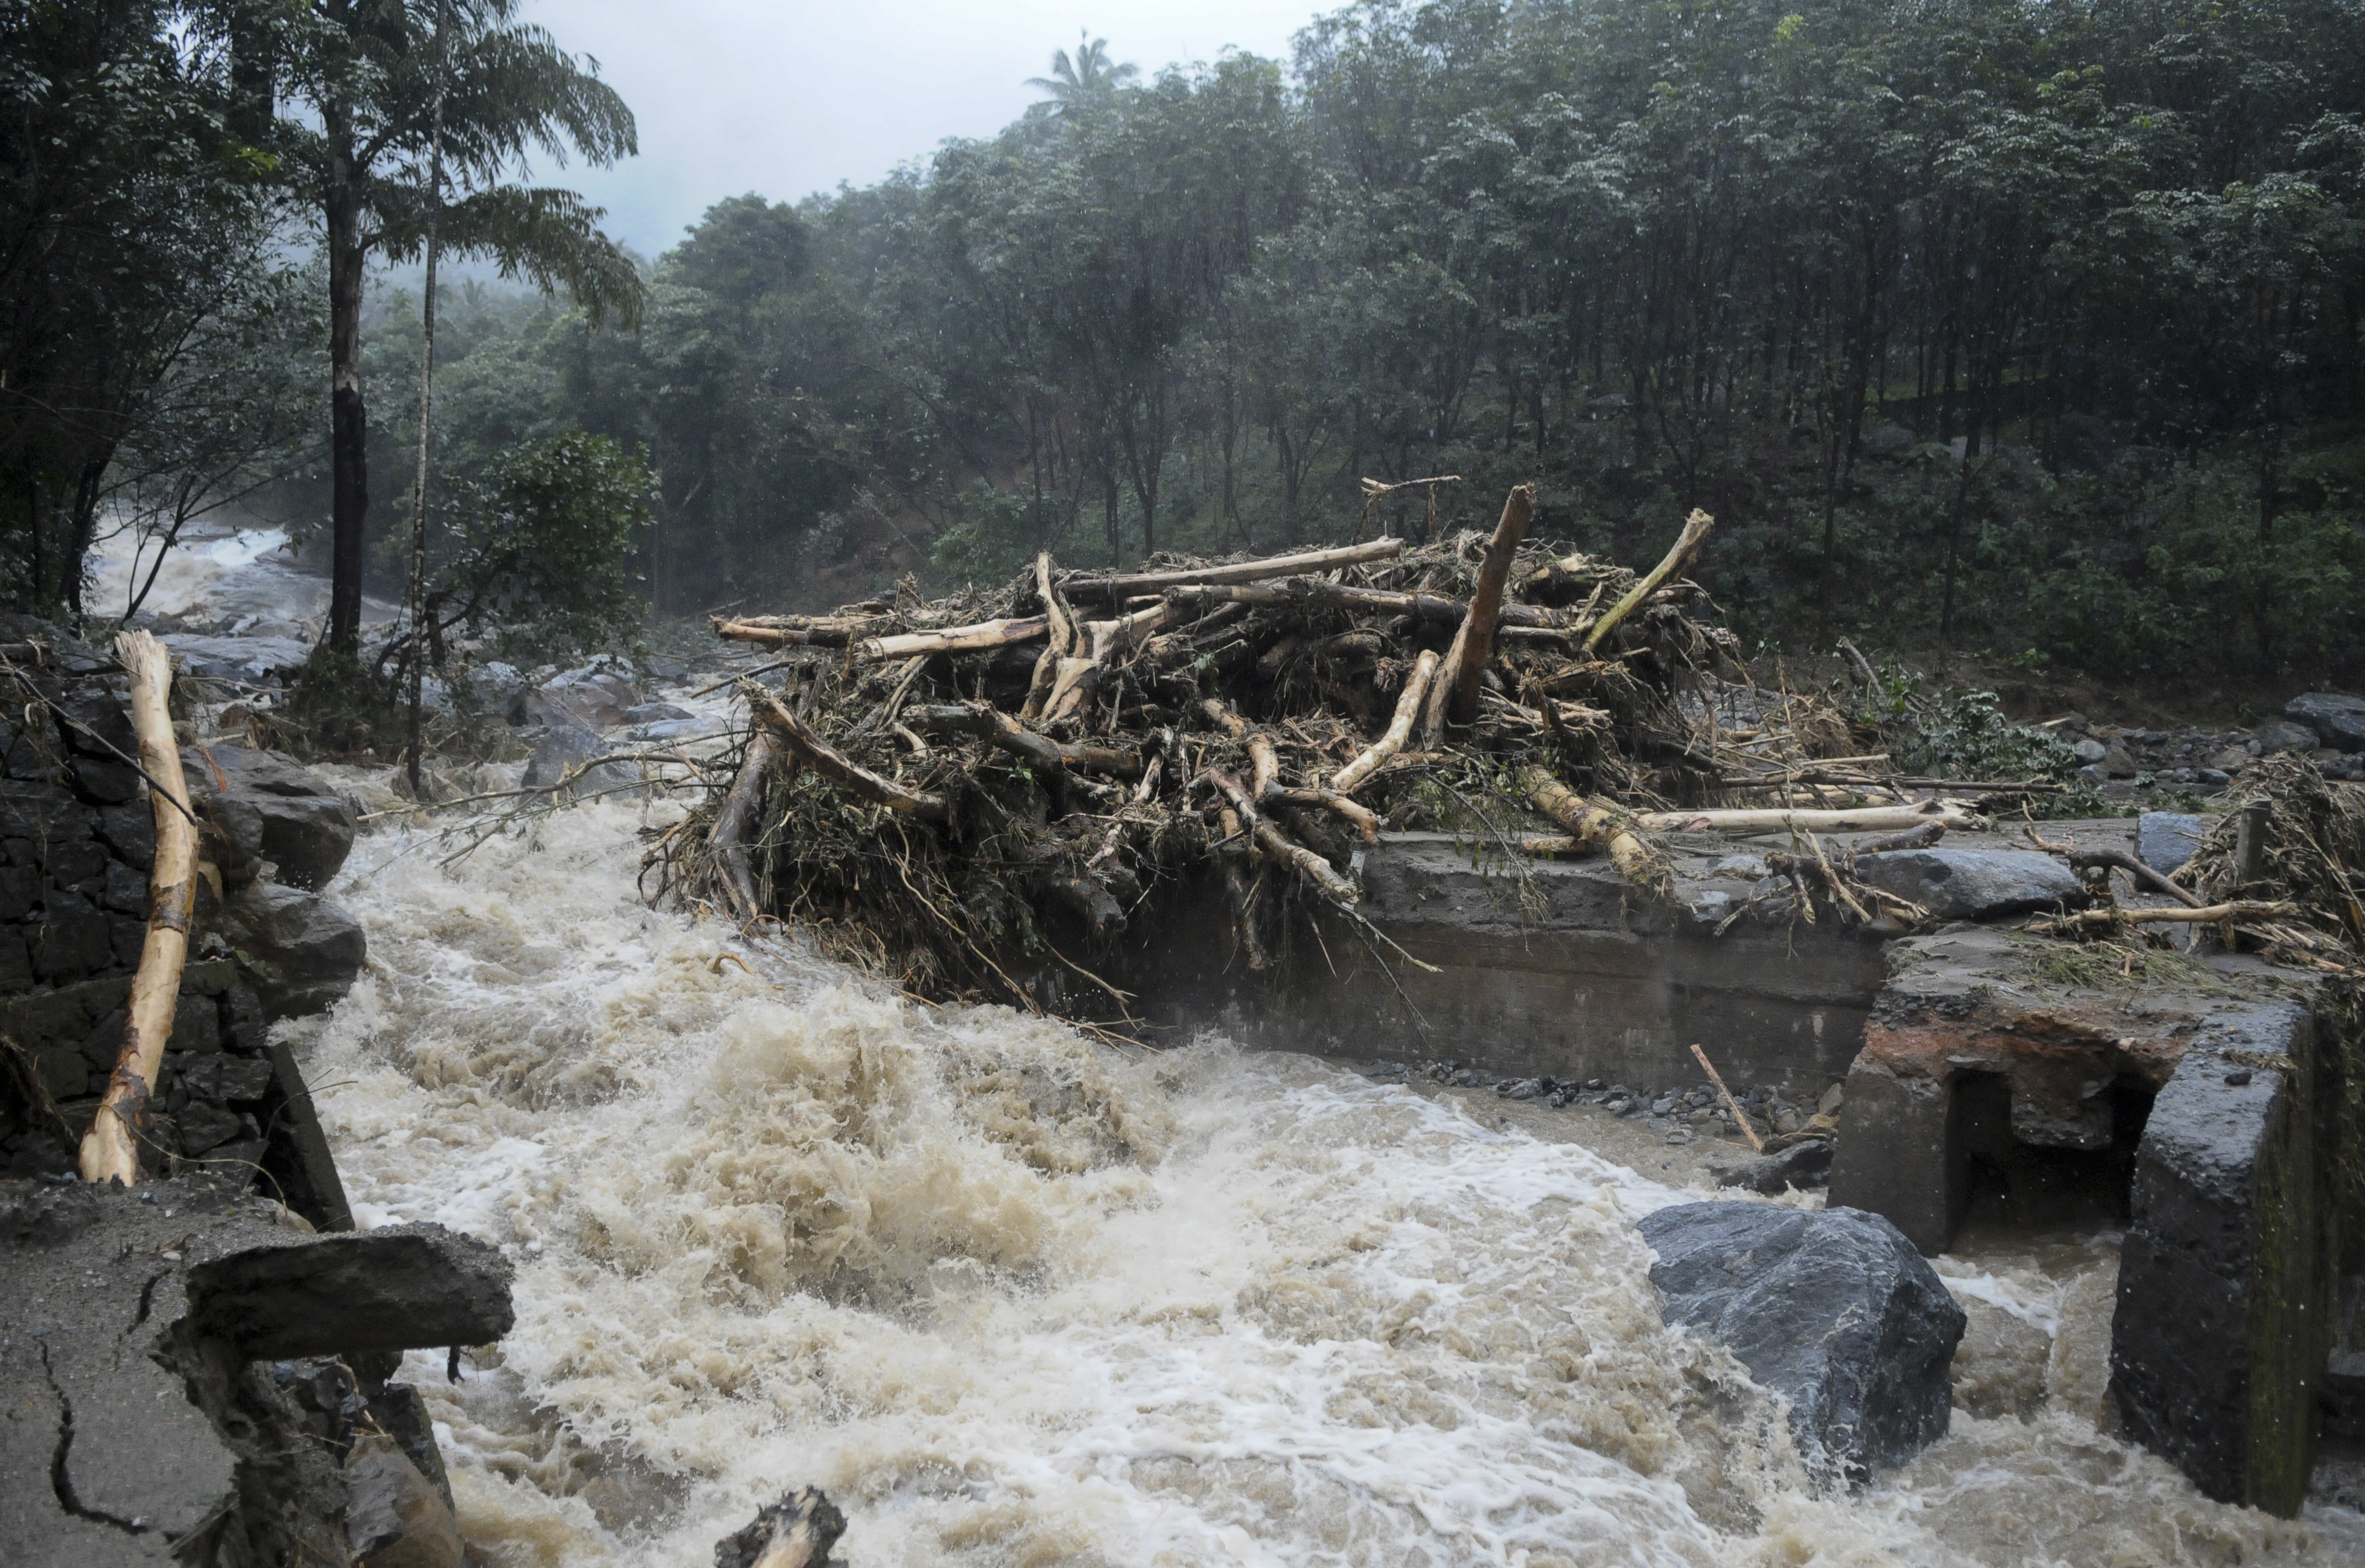 Water gushes out following heavy rain in Kozhikode, Kerala state, India